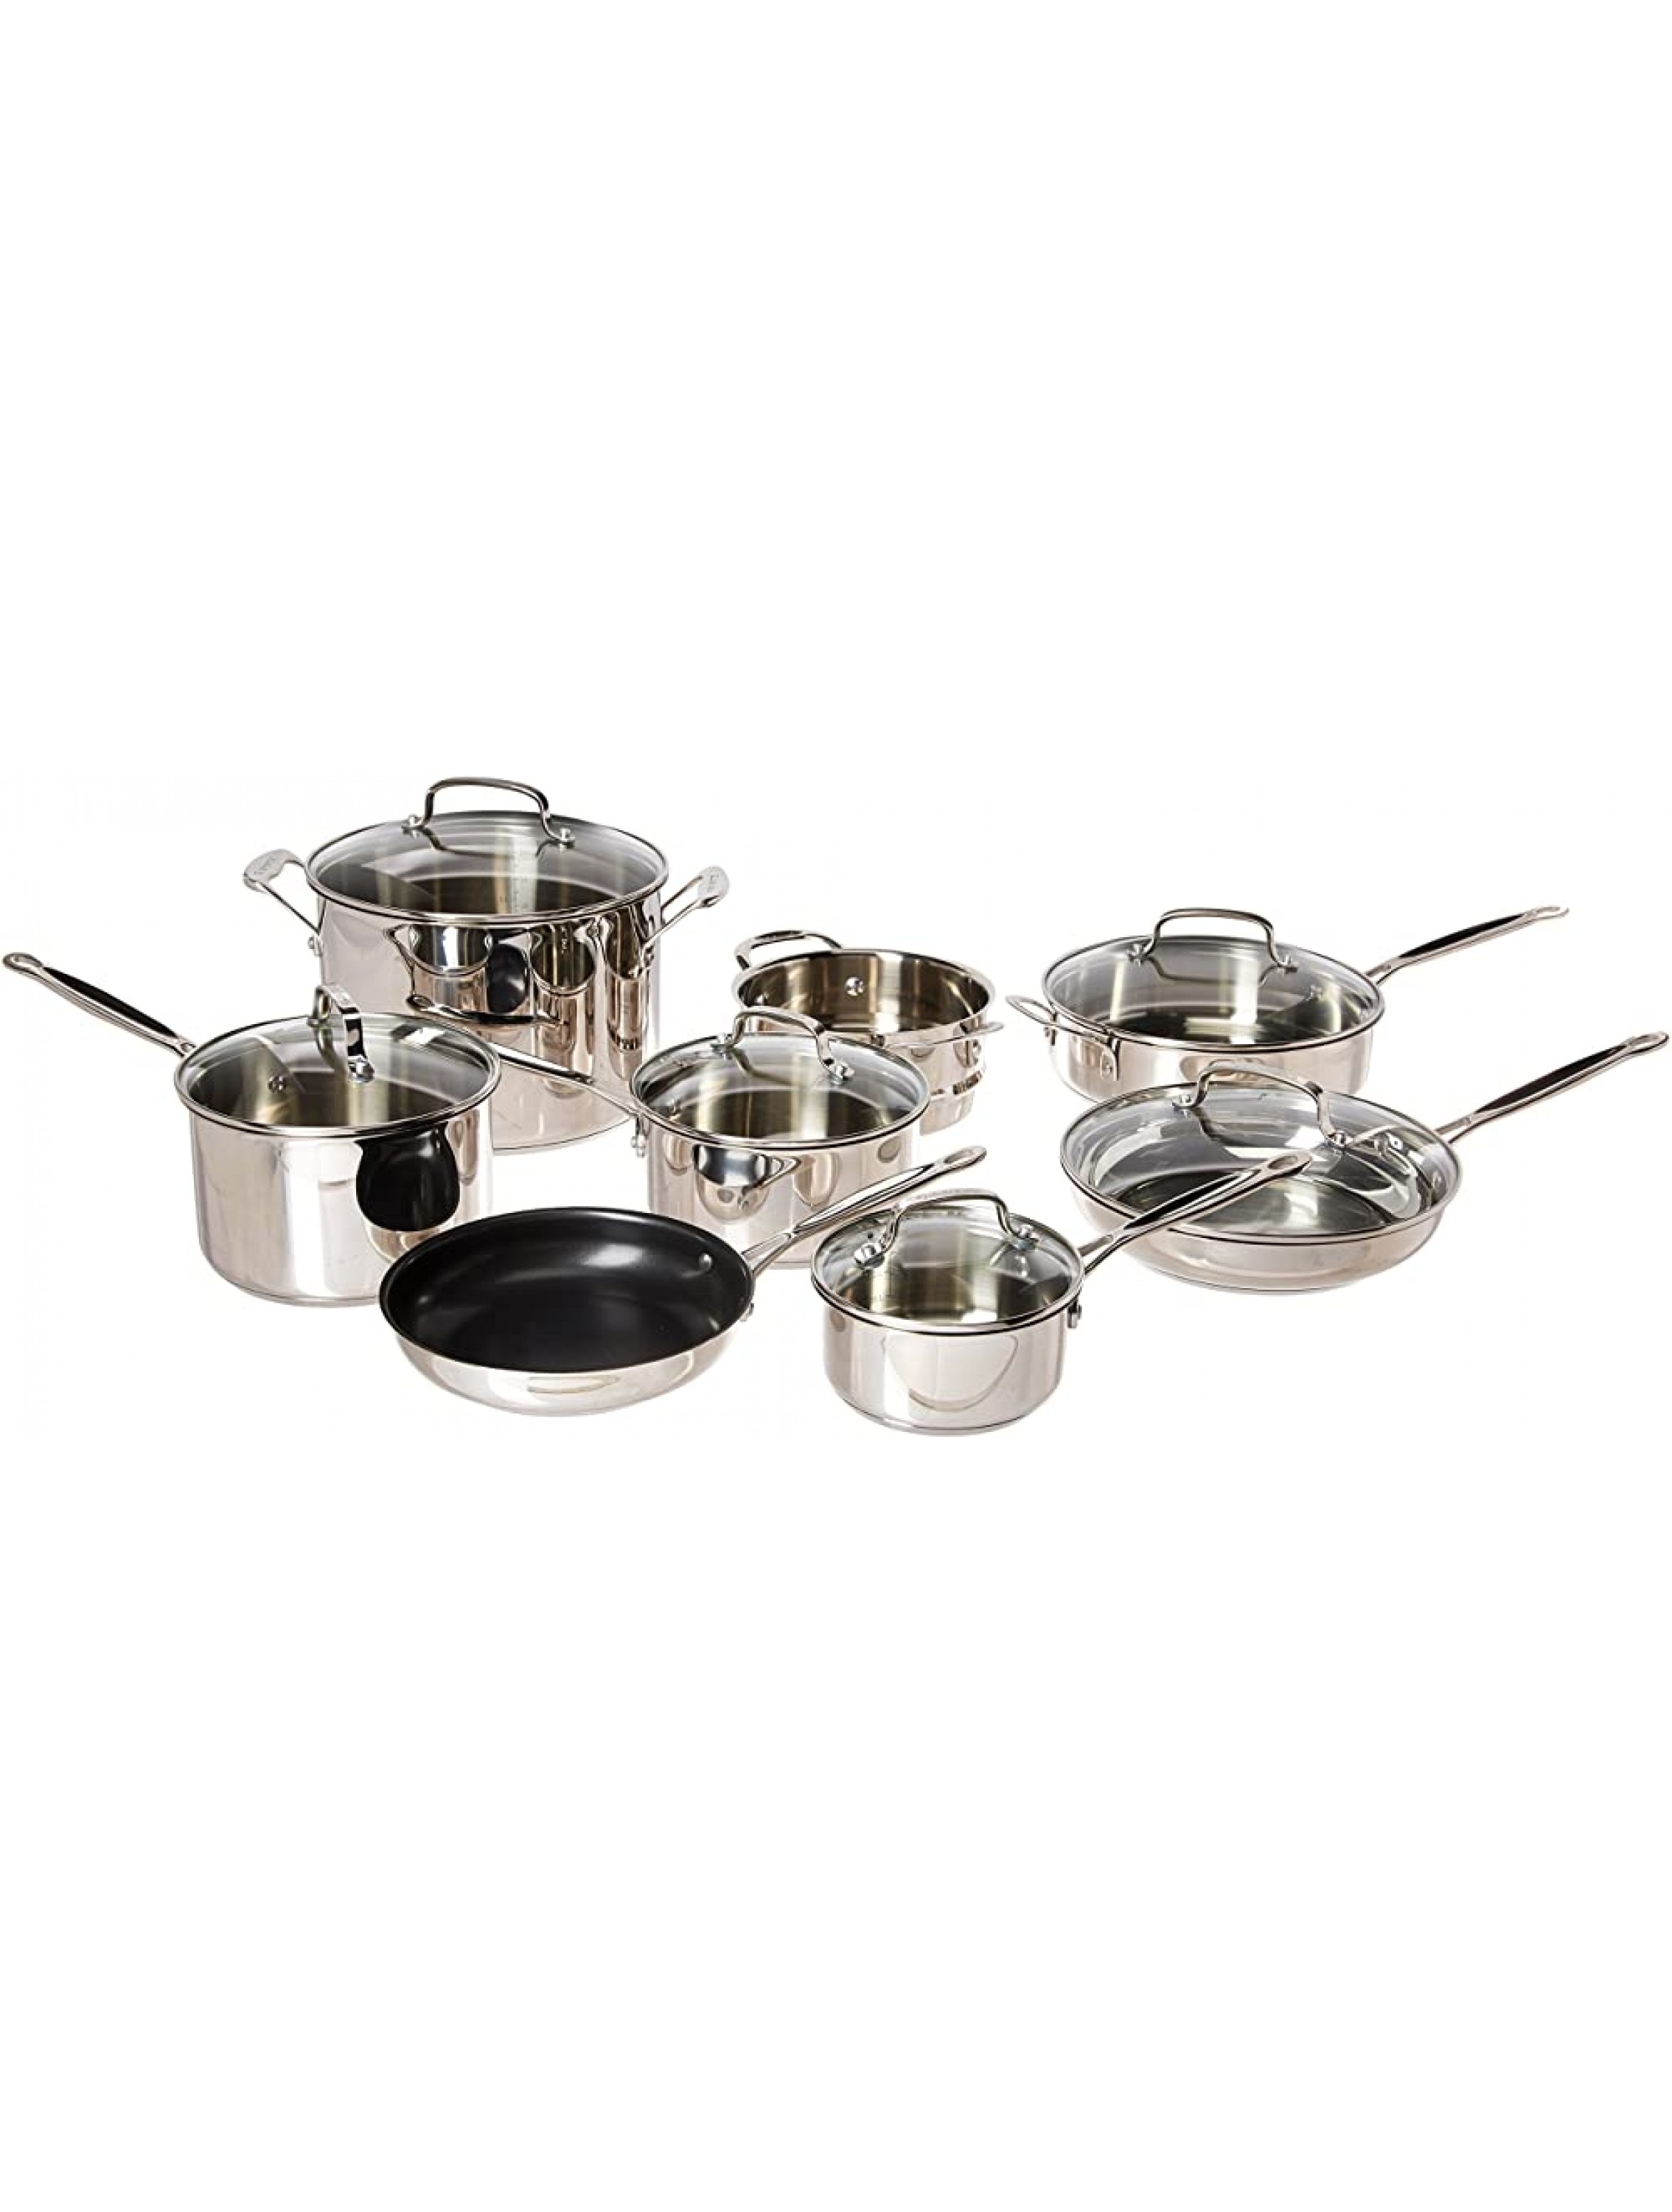 Cuisinart 77-14N Chef's Classic 14-Piece Set Stainless Steel - B37176TFK